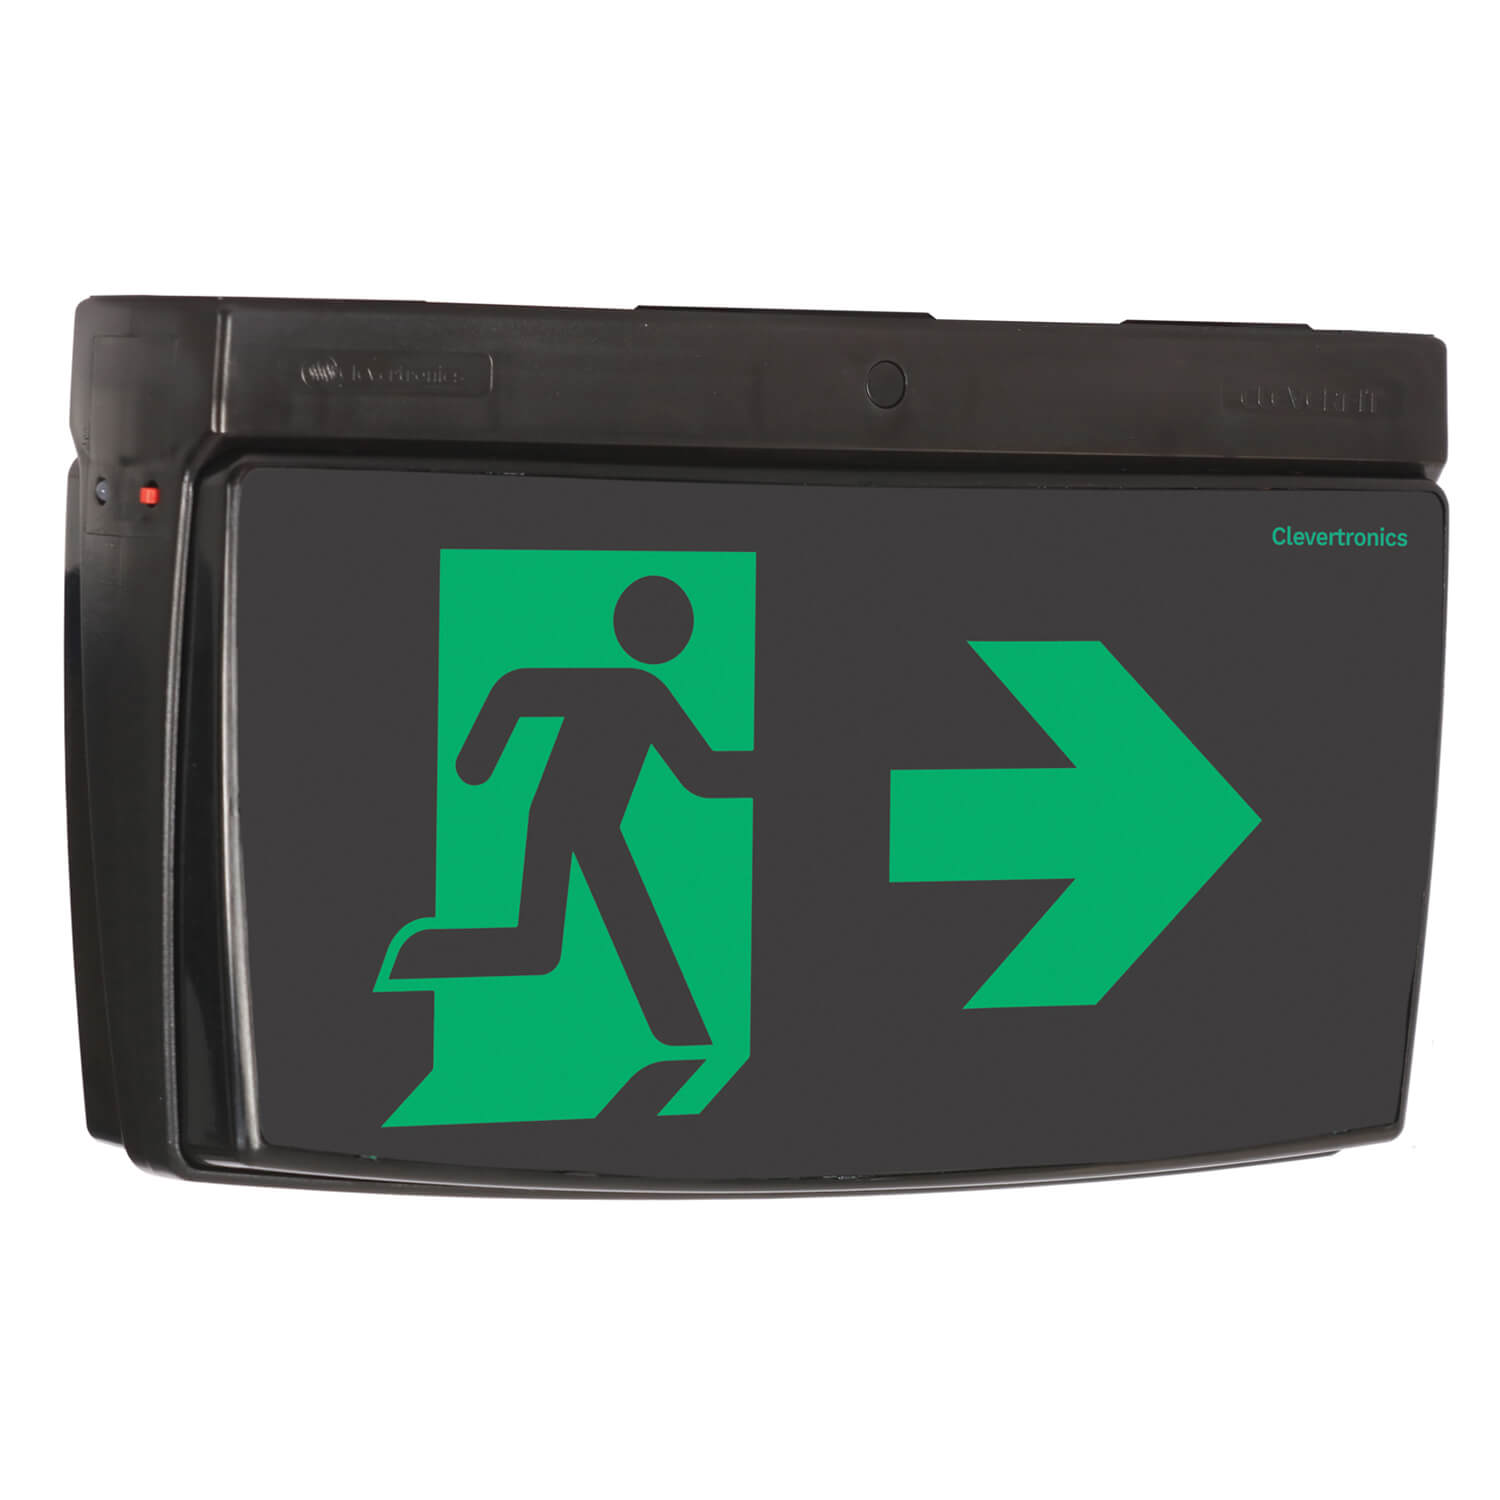 clevertronics emergency lighting exit light uk cleverfit theatre